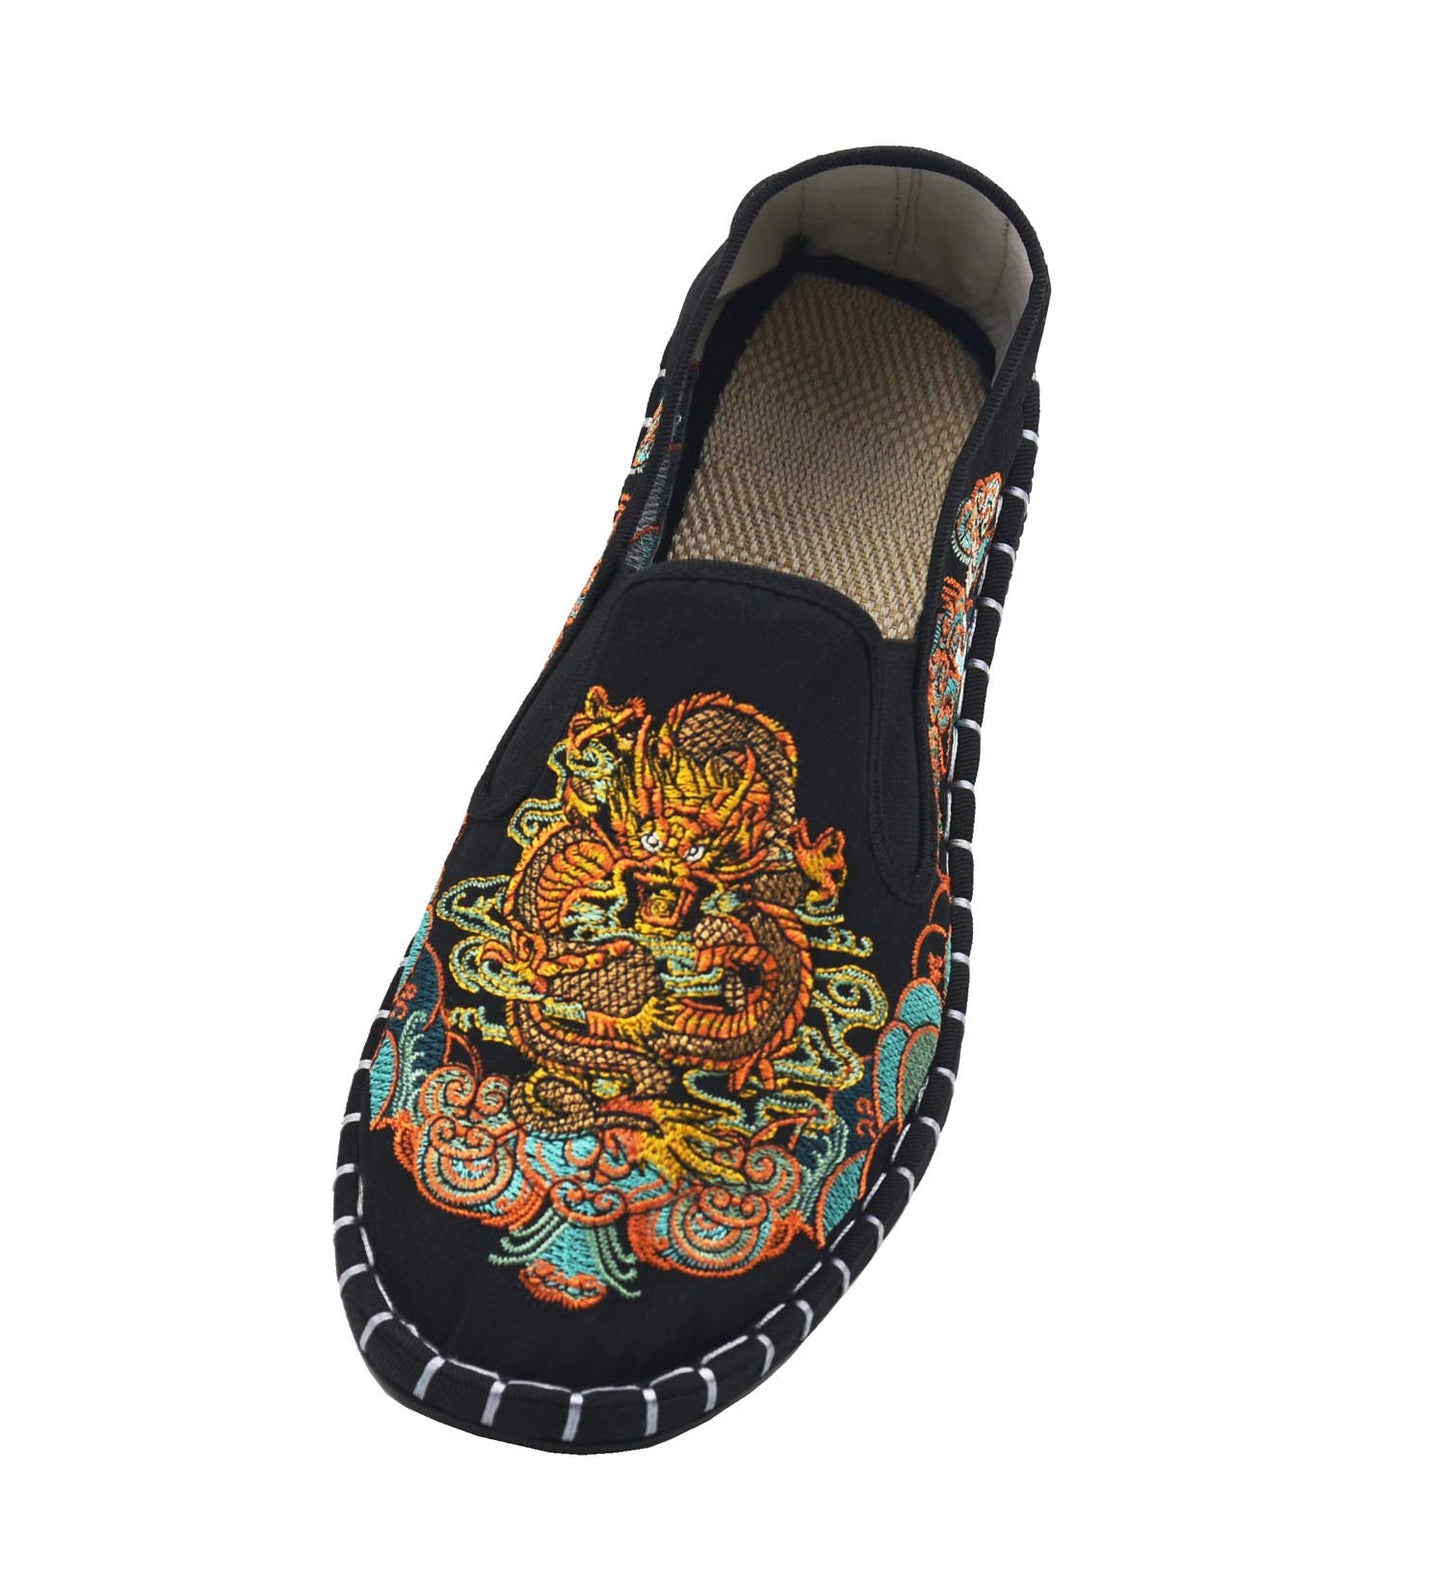 Majitangcun Old Beijing Shoes Embroidered Shoes Kung Fu Tai Chi Shoes Sports Shoes Men and Women Martial Arts Foot Protection Equipment Size 40